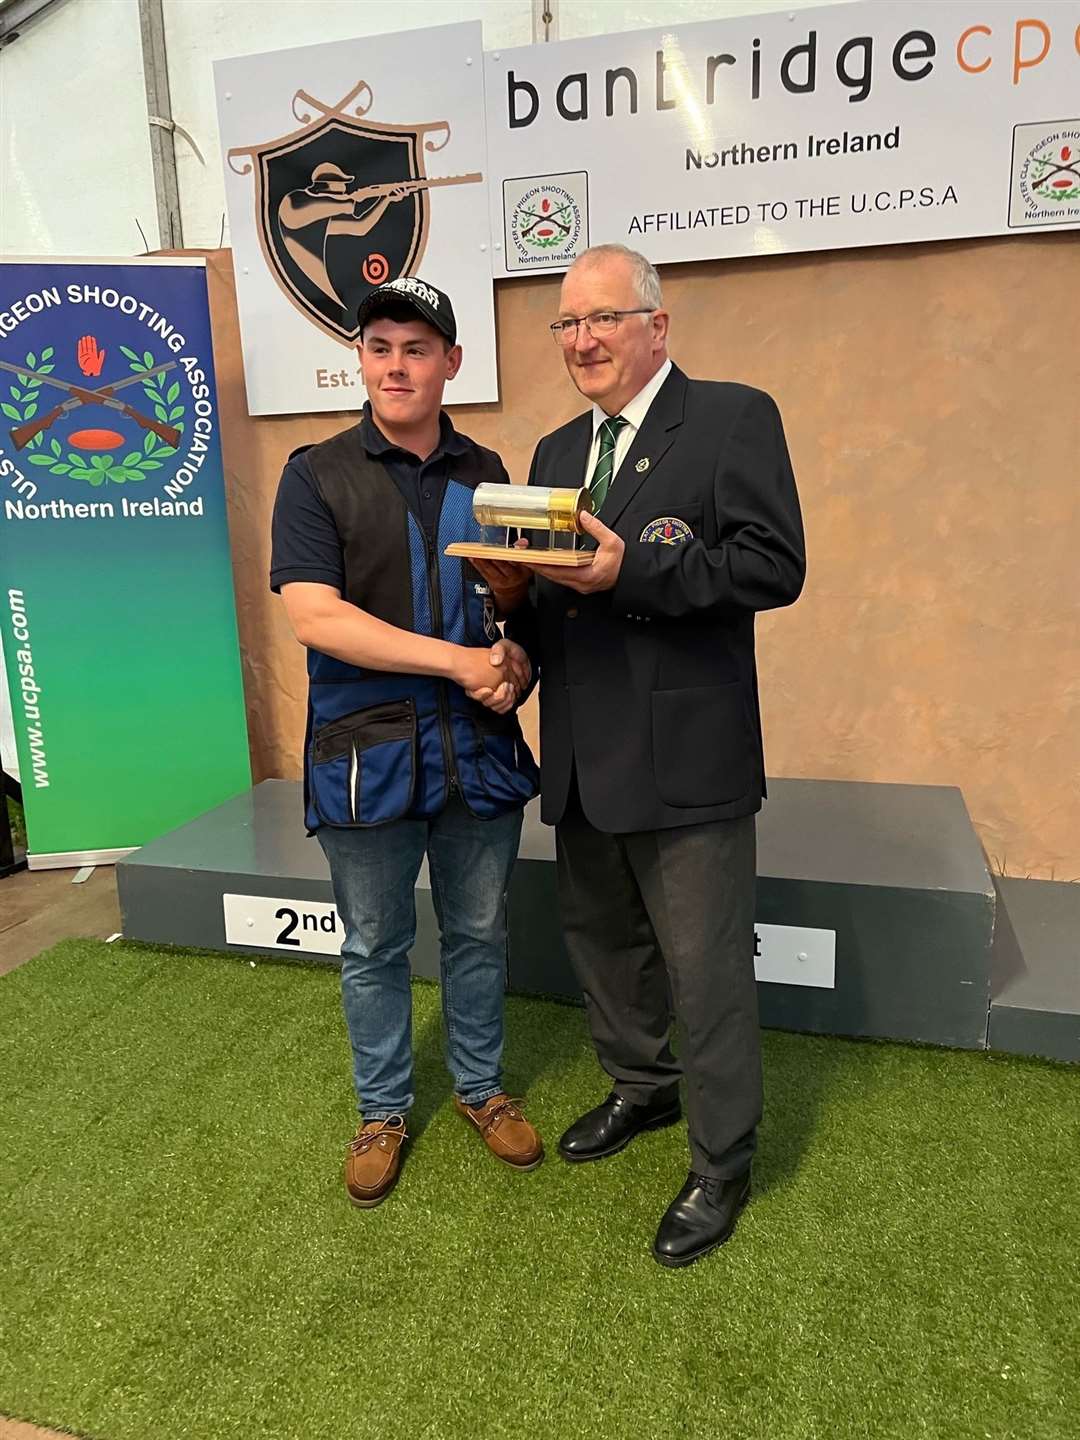 Hamish is presented with the prestigious Caledonian Cartridge trophy by the president of Banbridge Shooting Ground. The trophy was awarded for High Junior for Scotland at the British Open.